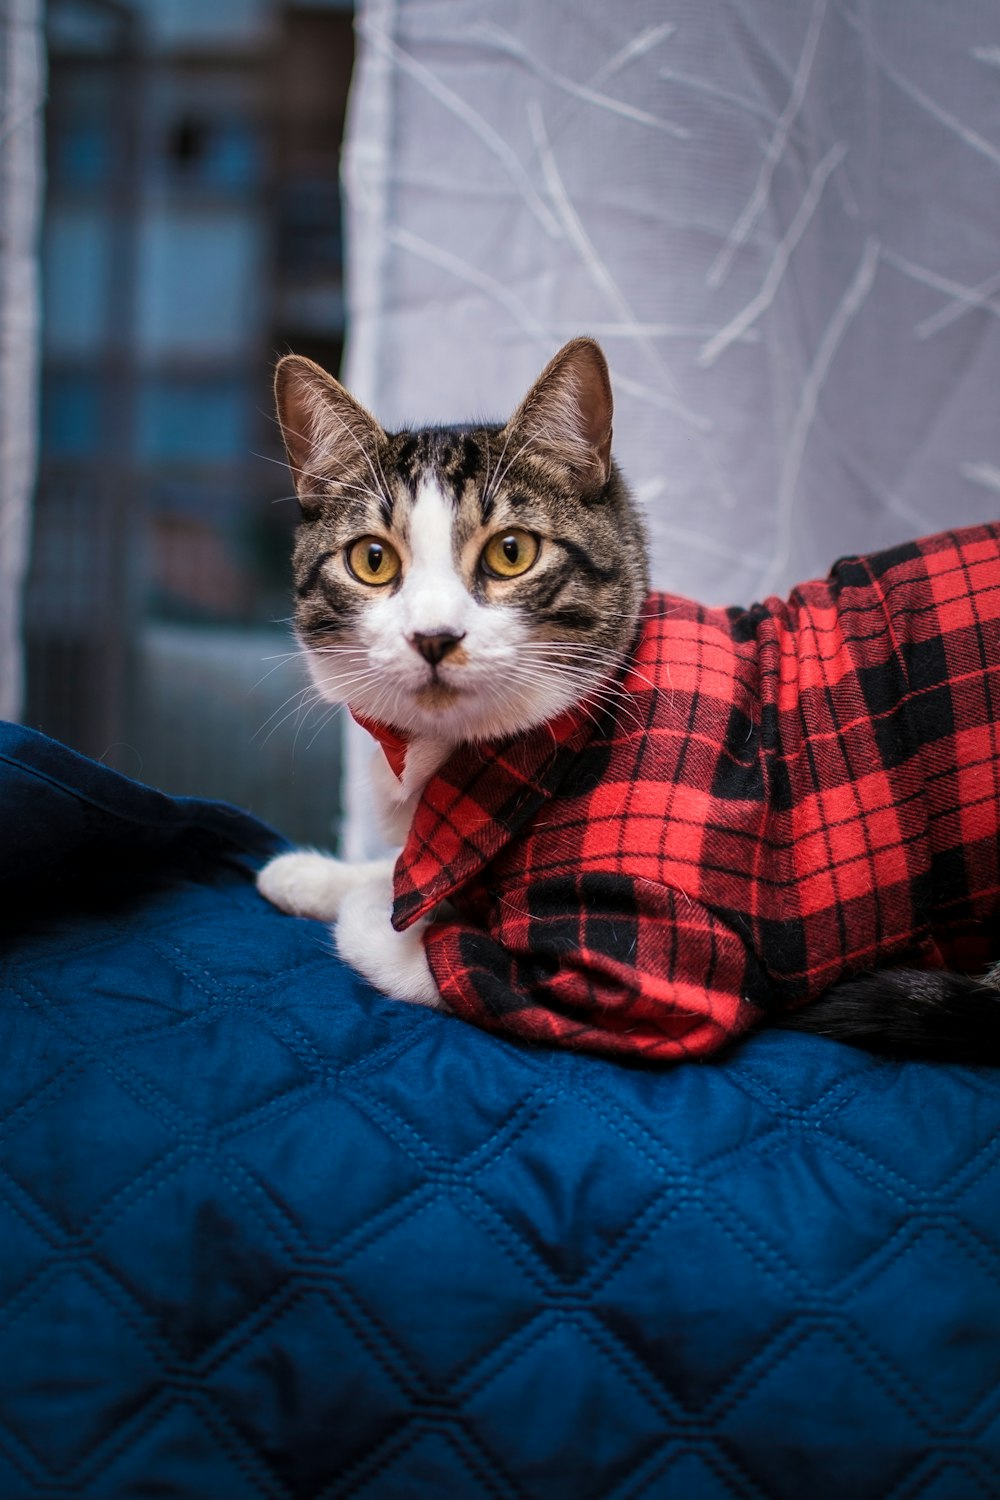 a cat wearing a red and black plaid shirt